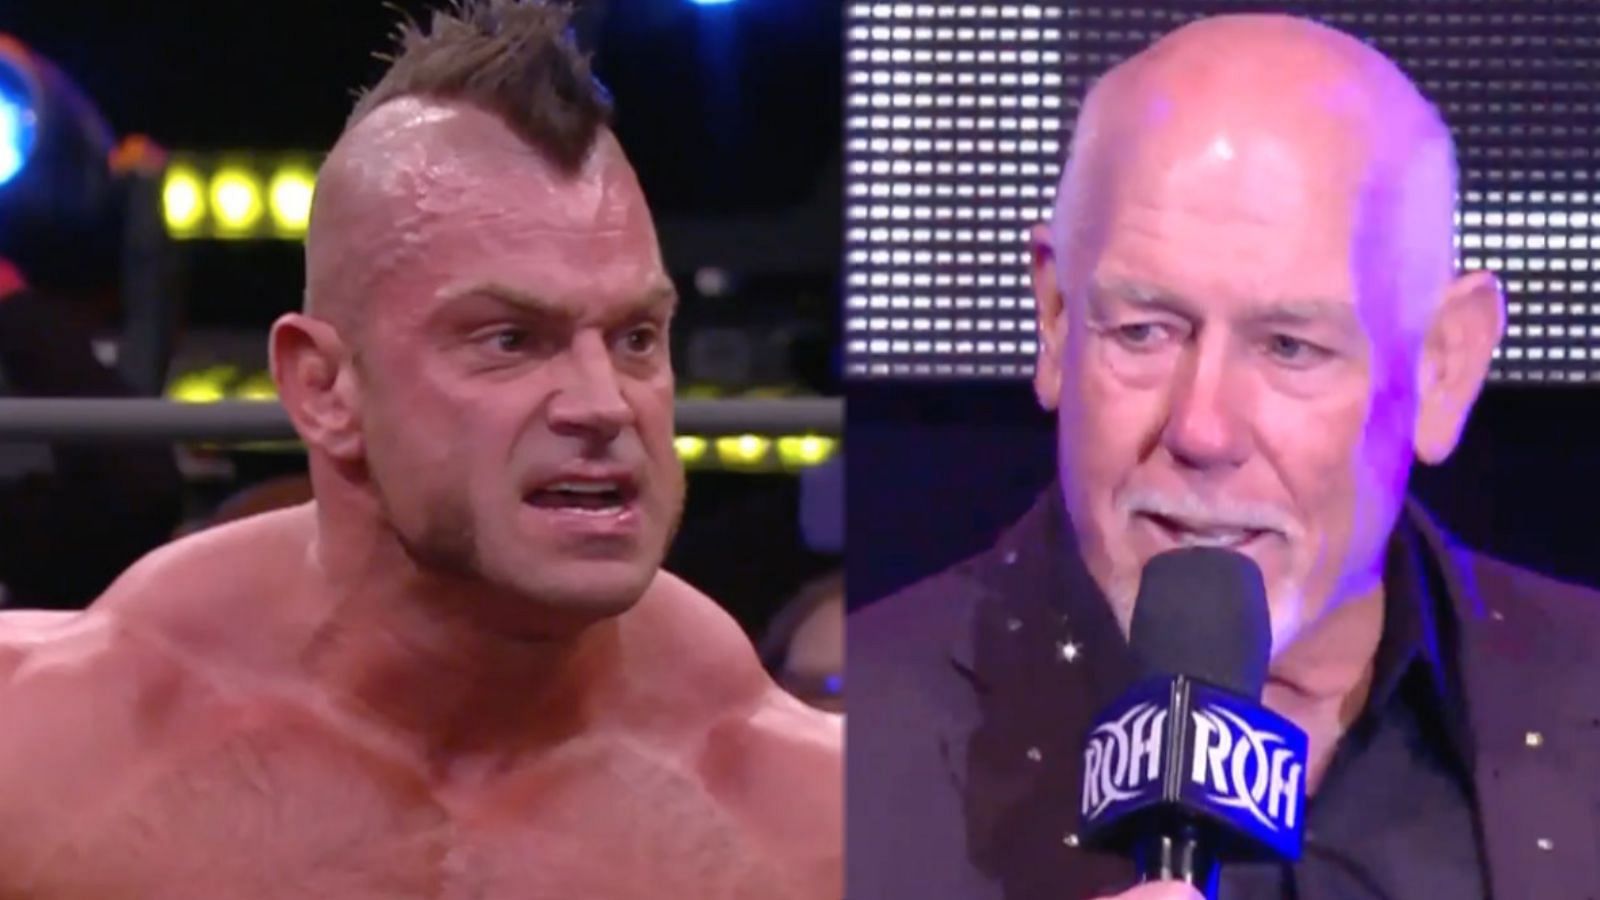 Brian Cage signed with Tully Blanchard Enterprises during his surprising ROH debut